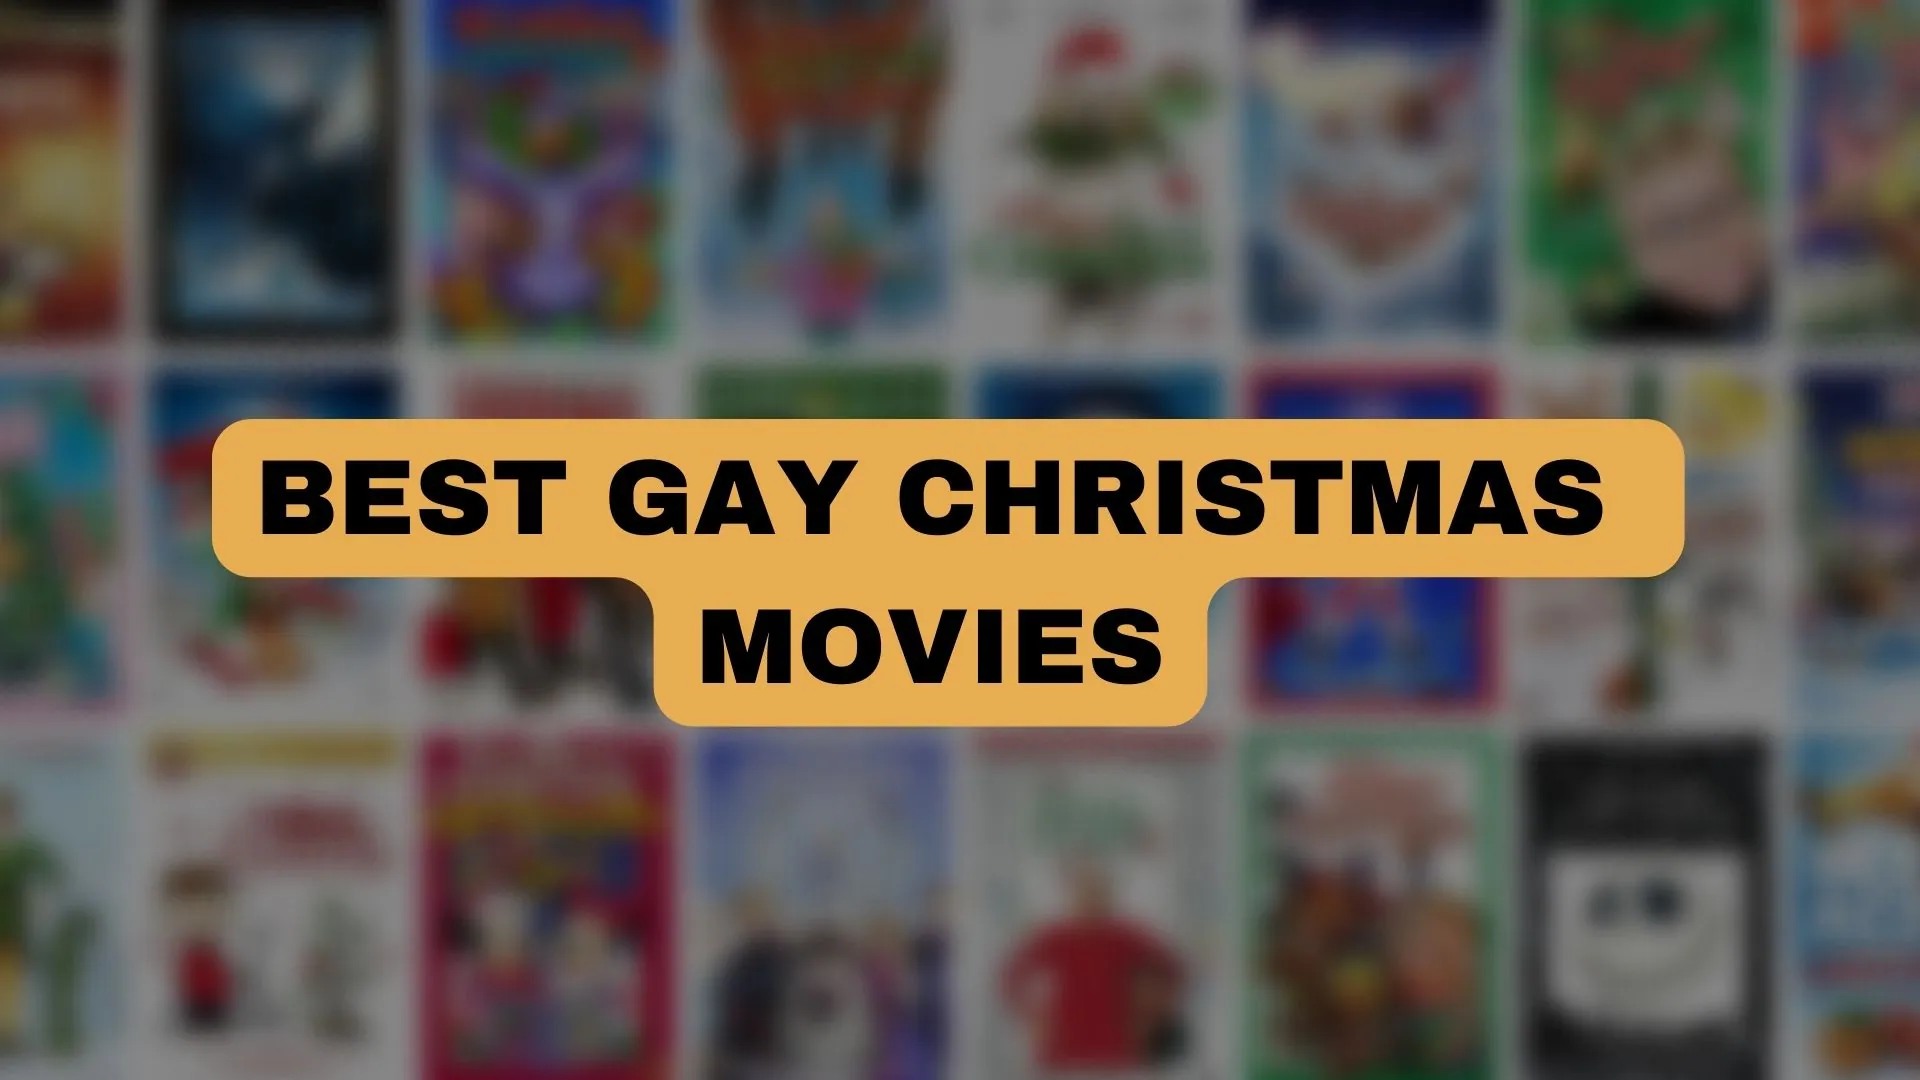 Best Gay Christmas Movies